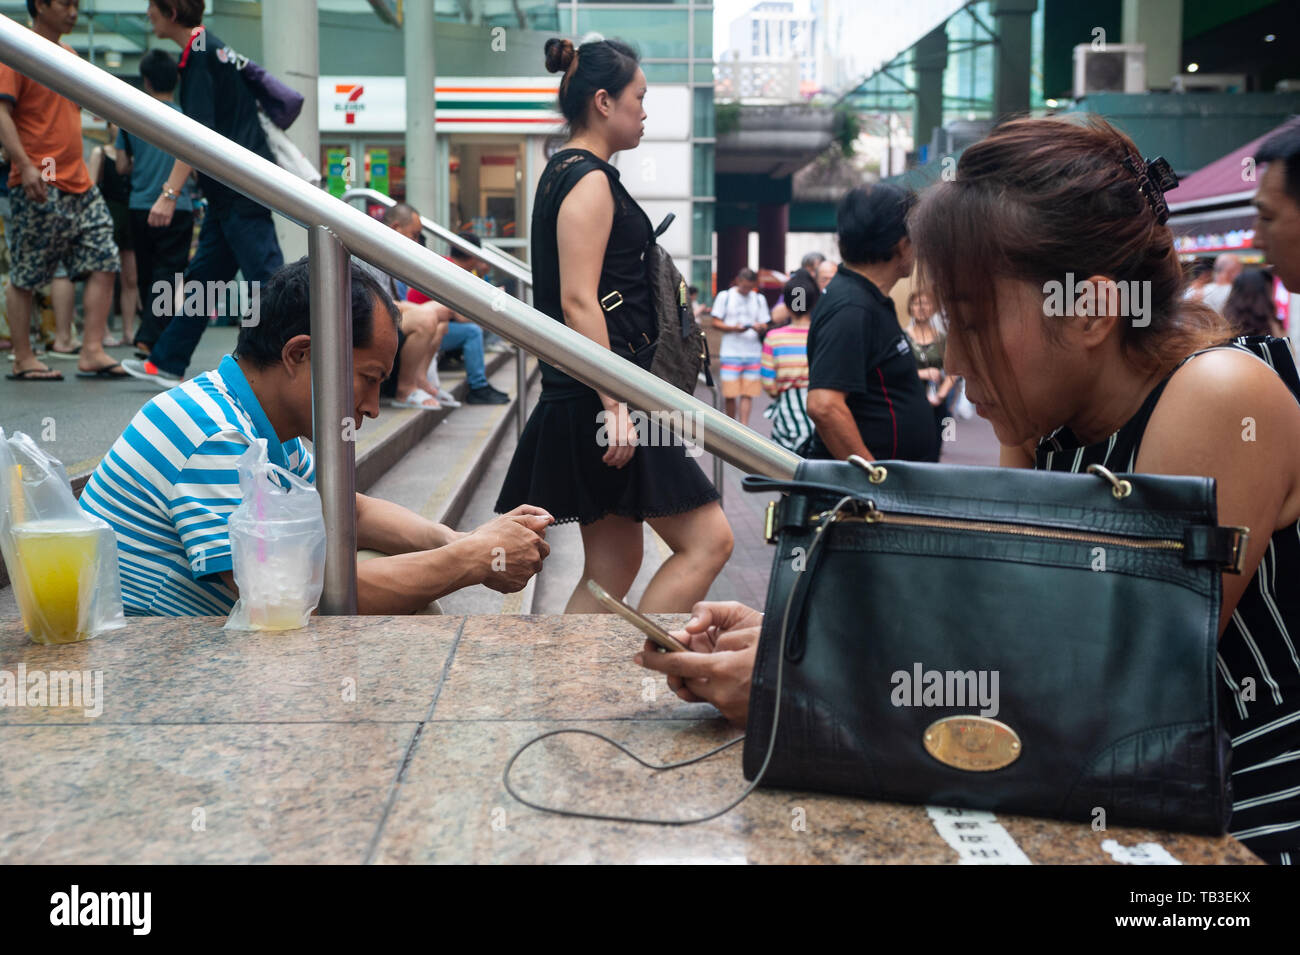 24.02.2019, Singapore, , Singapore - People are cavorting in front of one of the subway trains in Chinatown. 0SL190224D009CAROEX.JPG [MODEL RELEASE: N Stock Photo